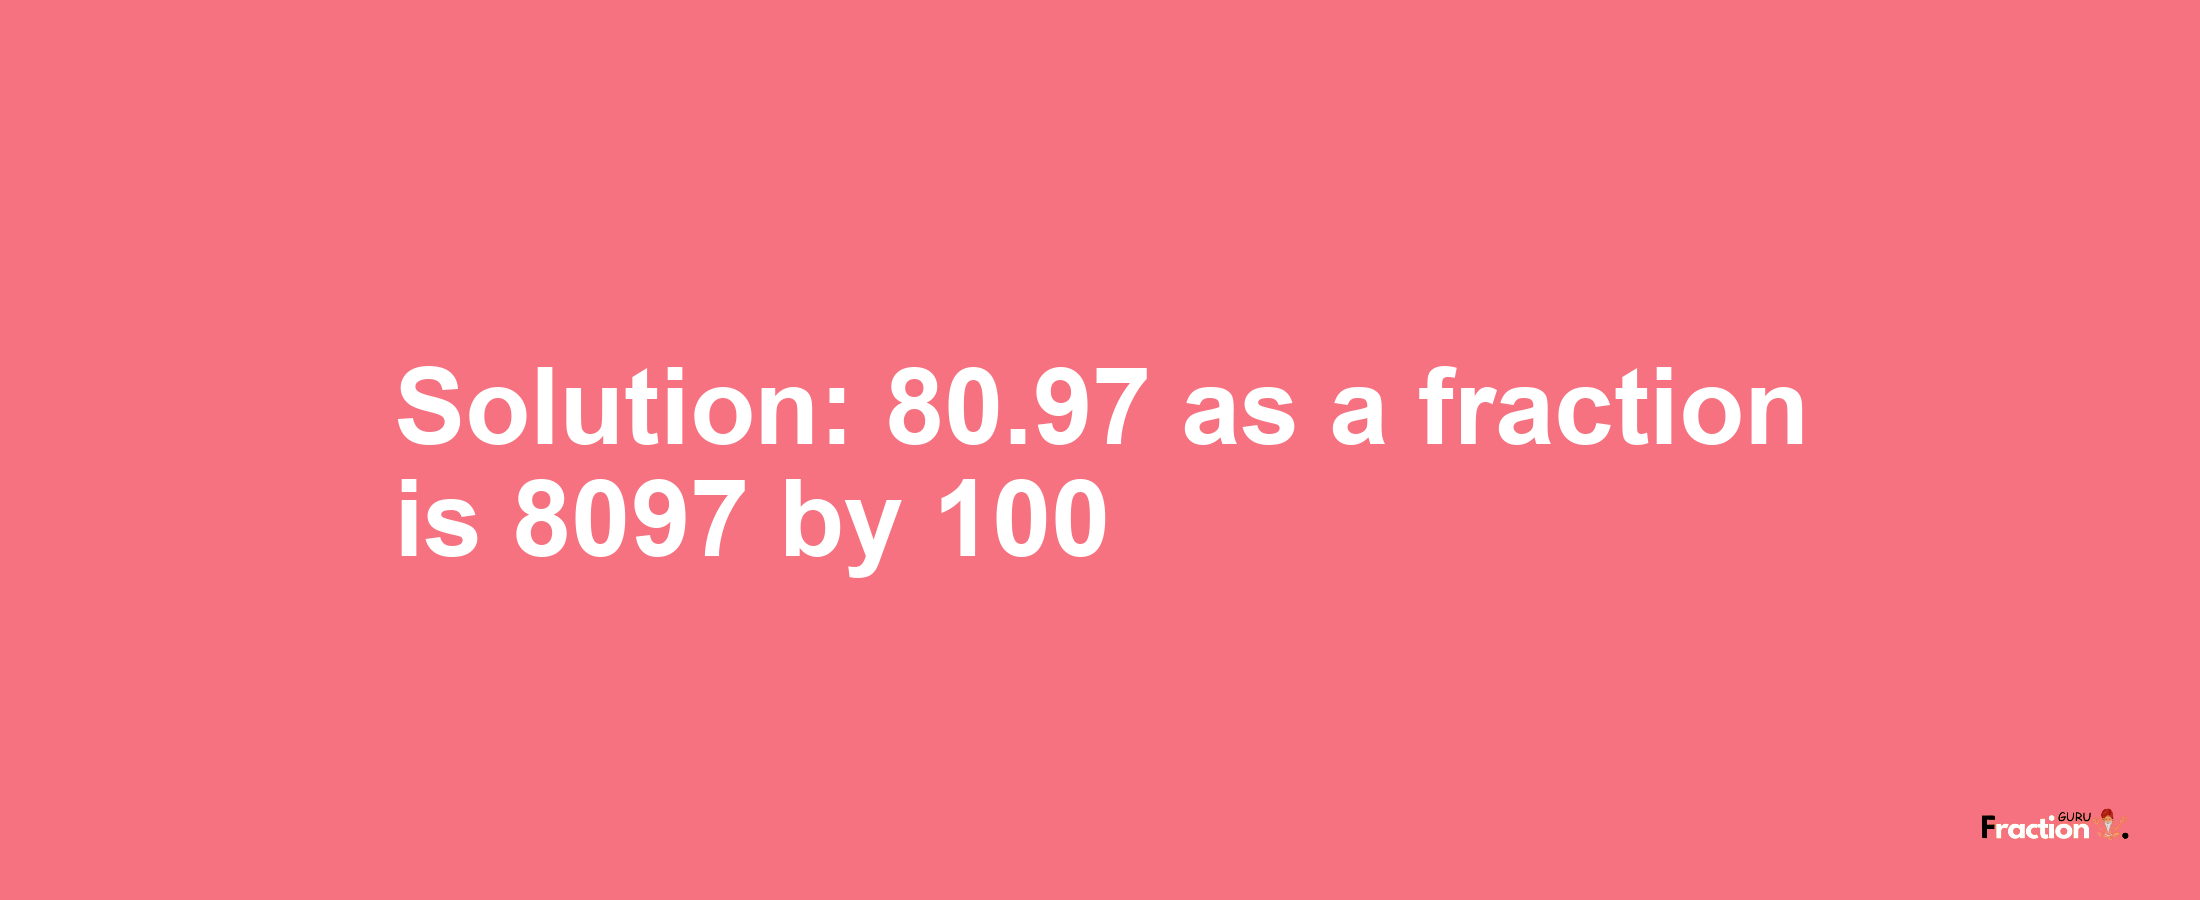 Solution:80.97 as a fraction is 8097/100